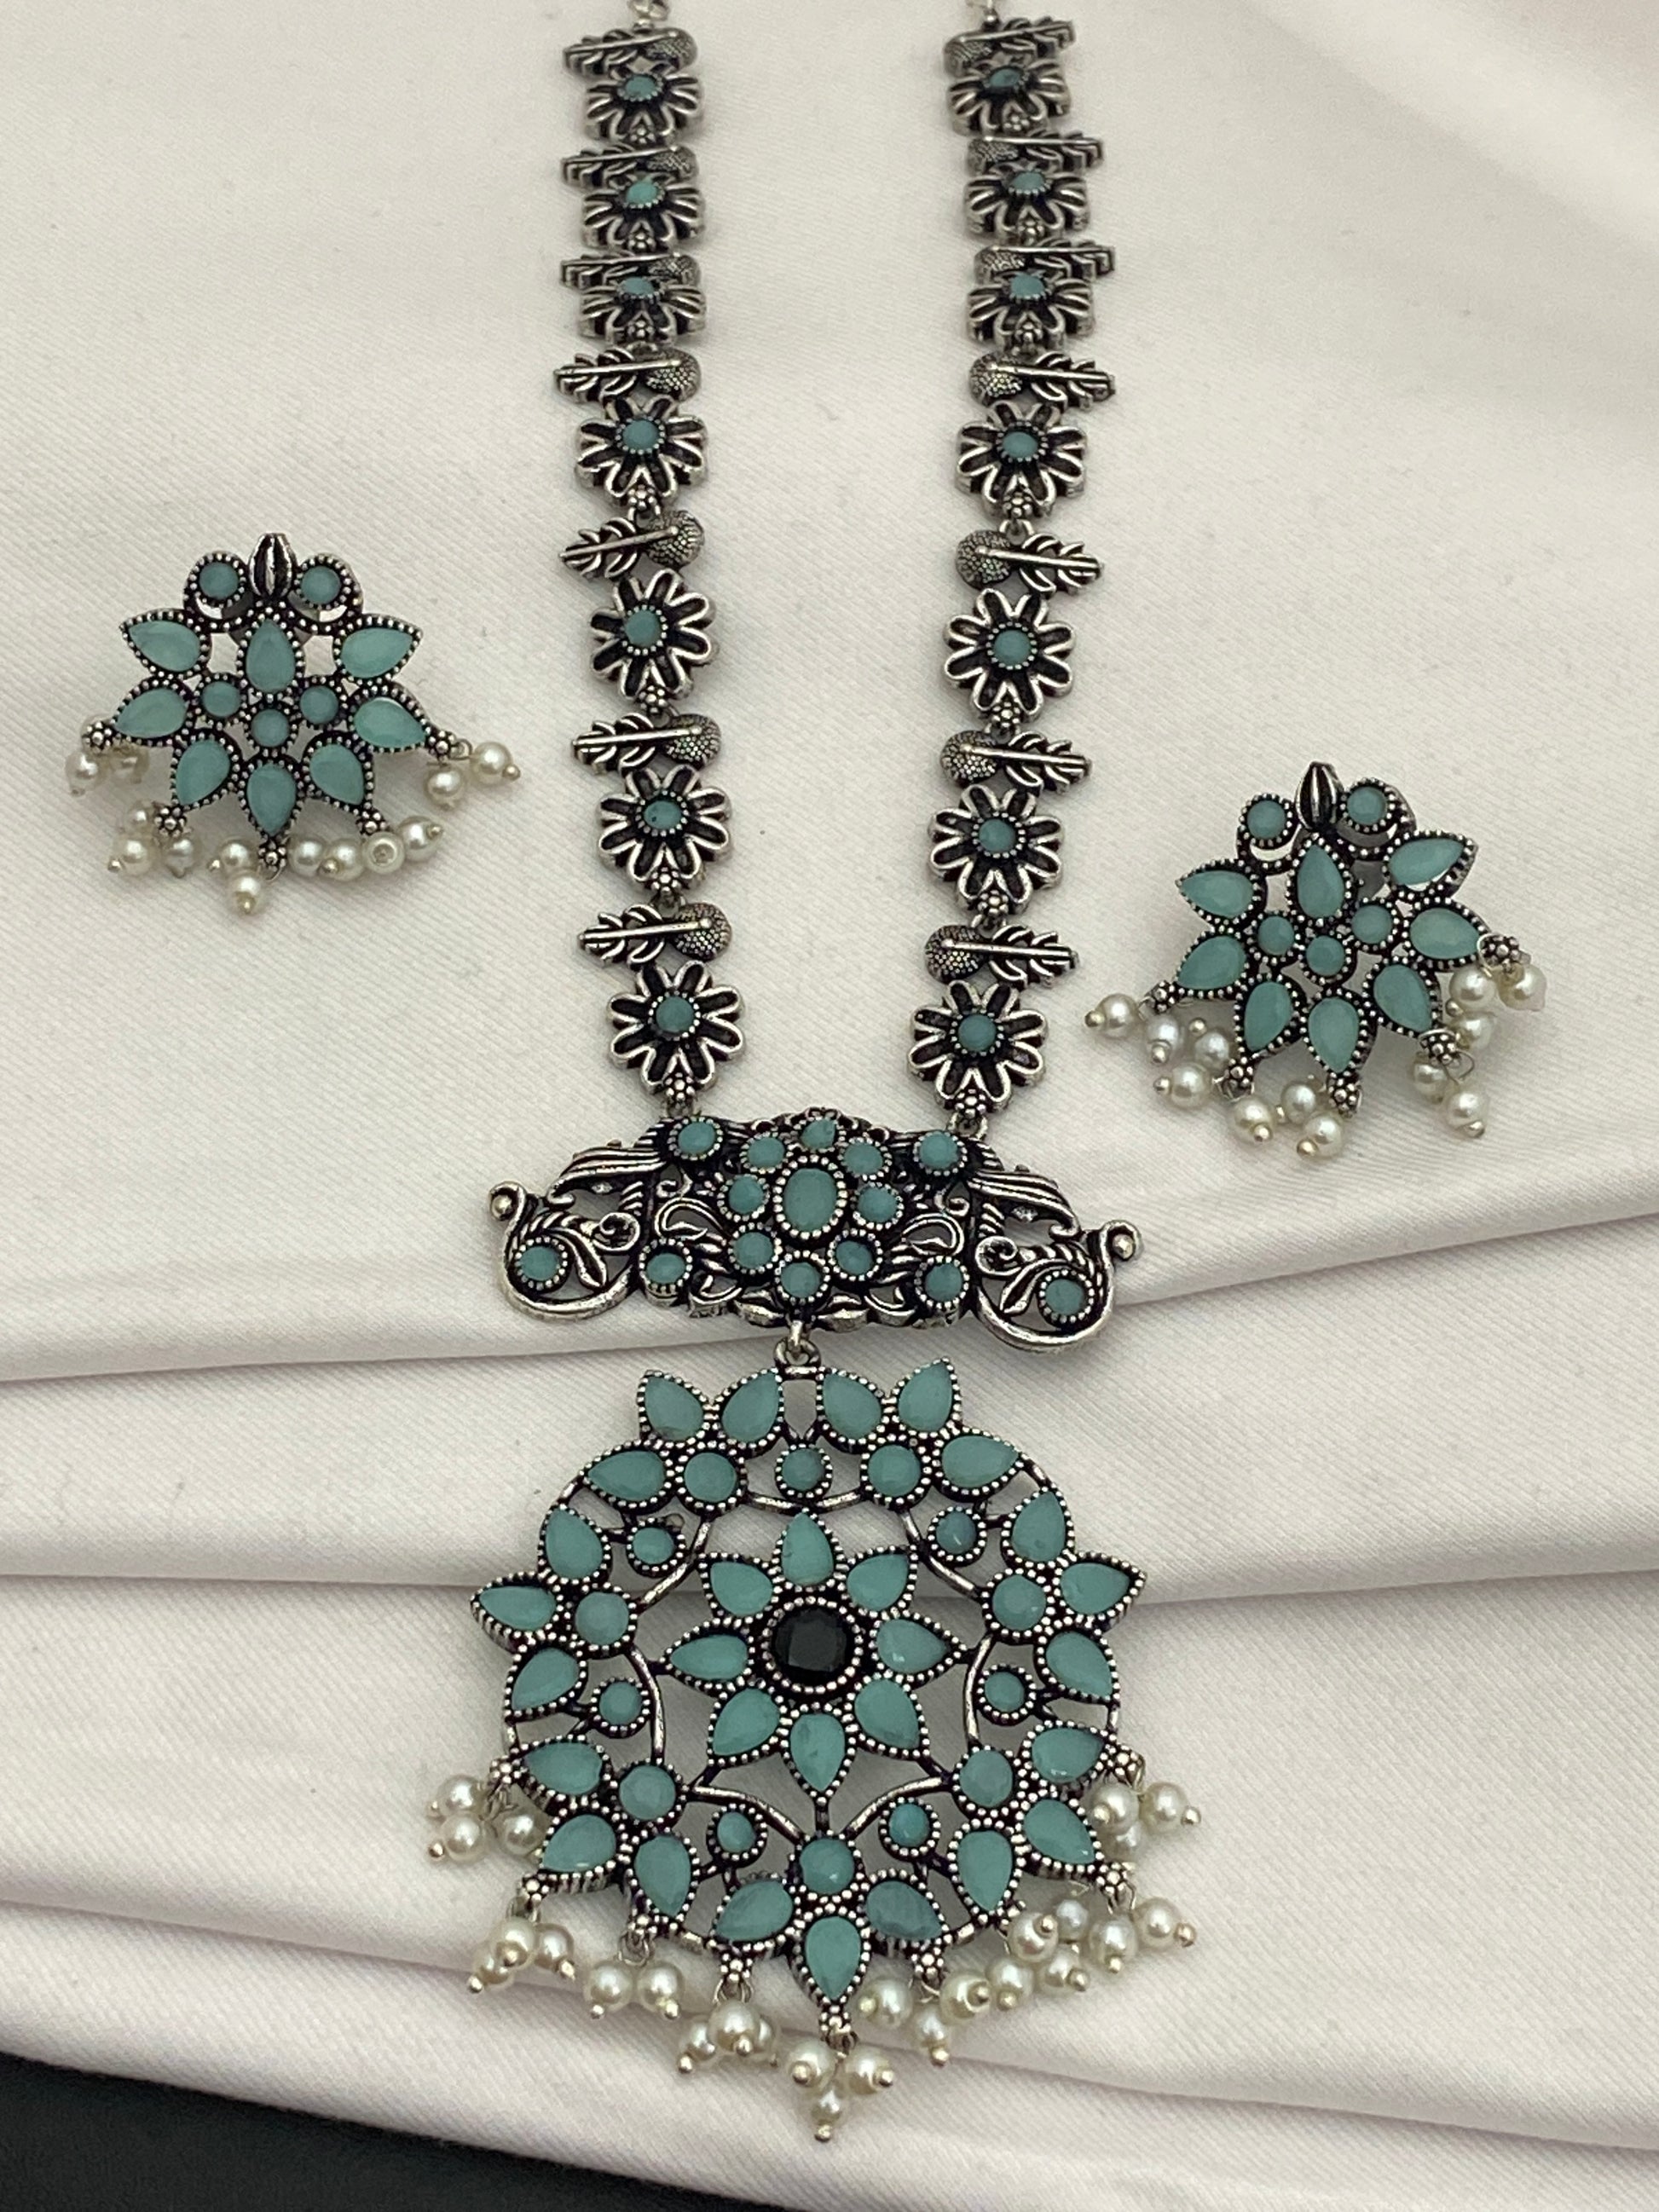 German Silver Oxidized Necklace With Earrings in Tucson